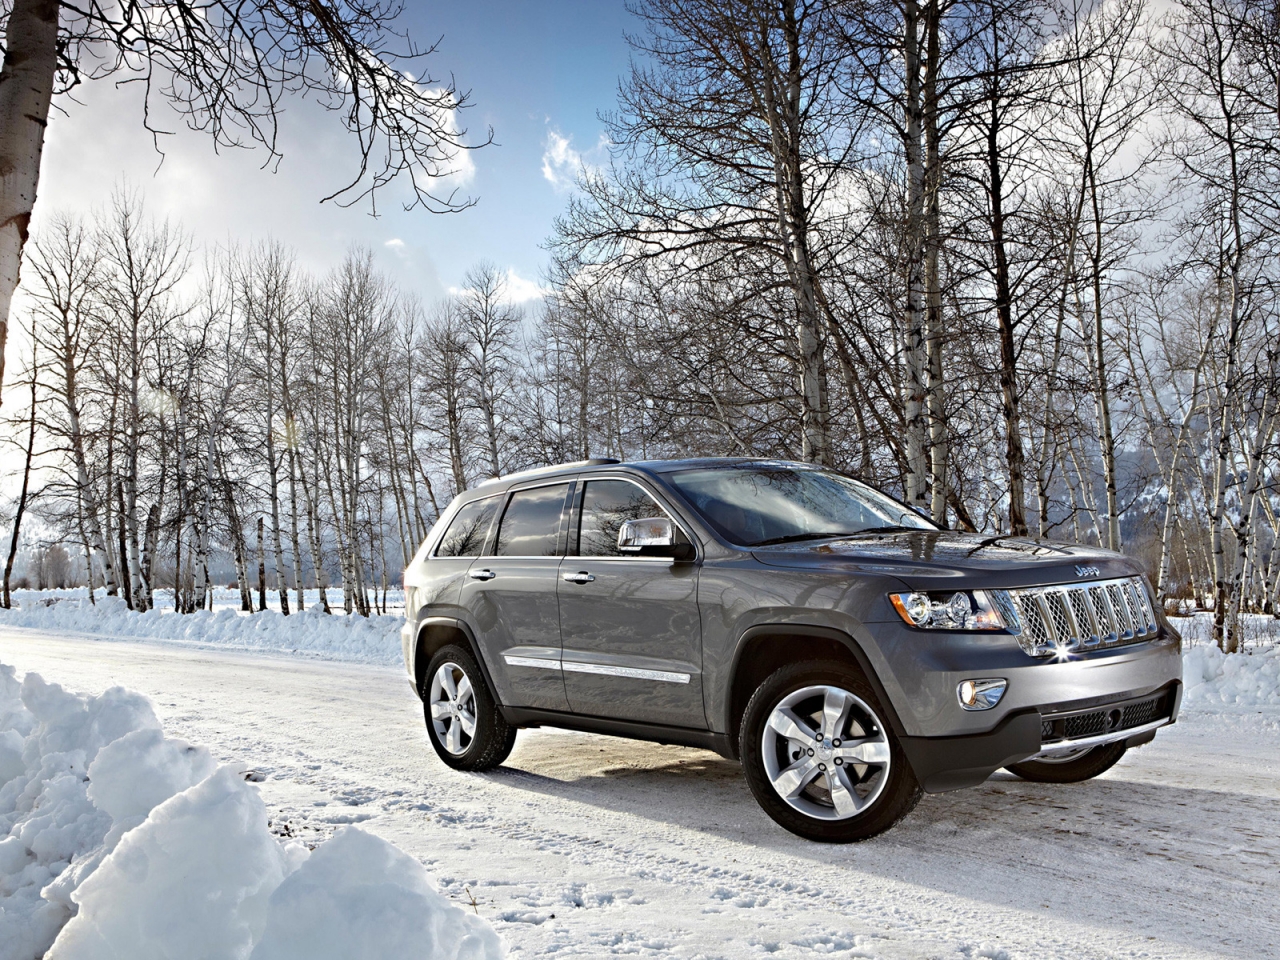 2012 Jeep Grand Cherokee for 1280 x 960 resolution